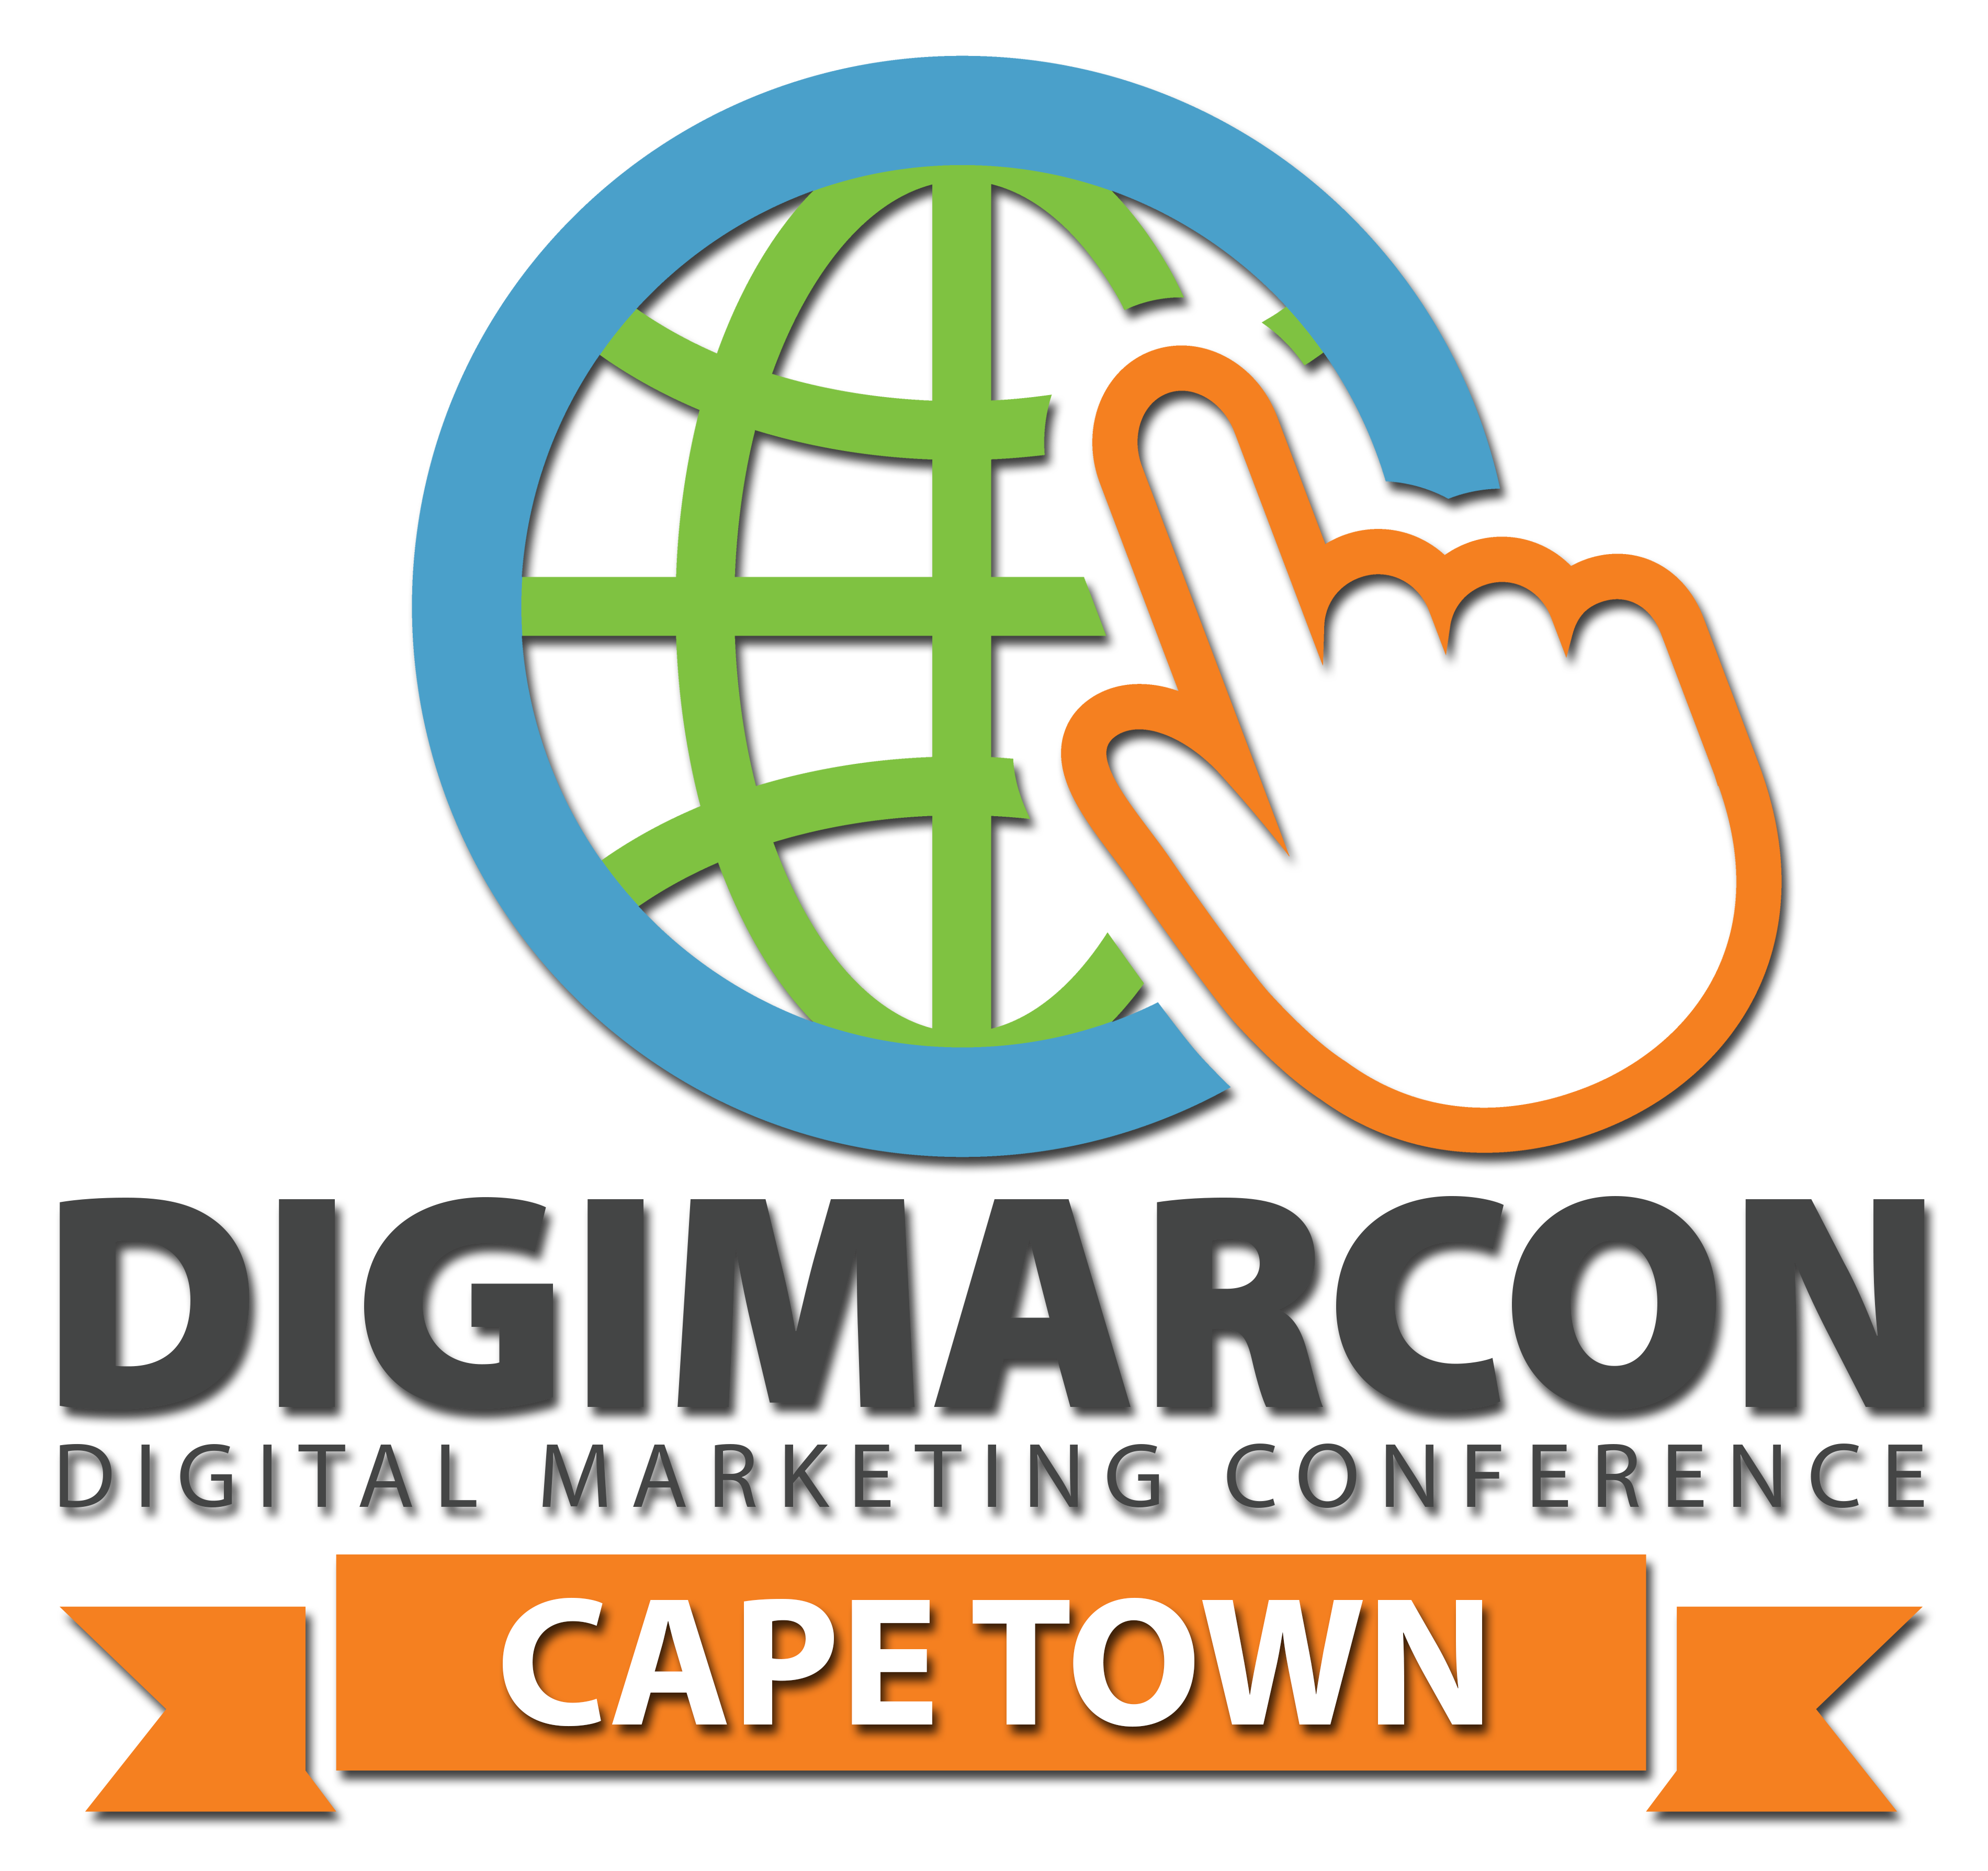 DigiMarCon South Africa – Digital Marketing, Media and Advertising Conference & Exhibition